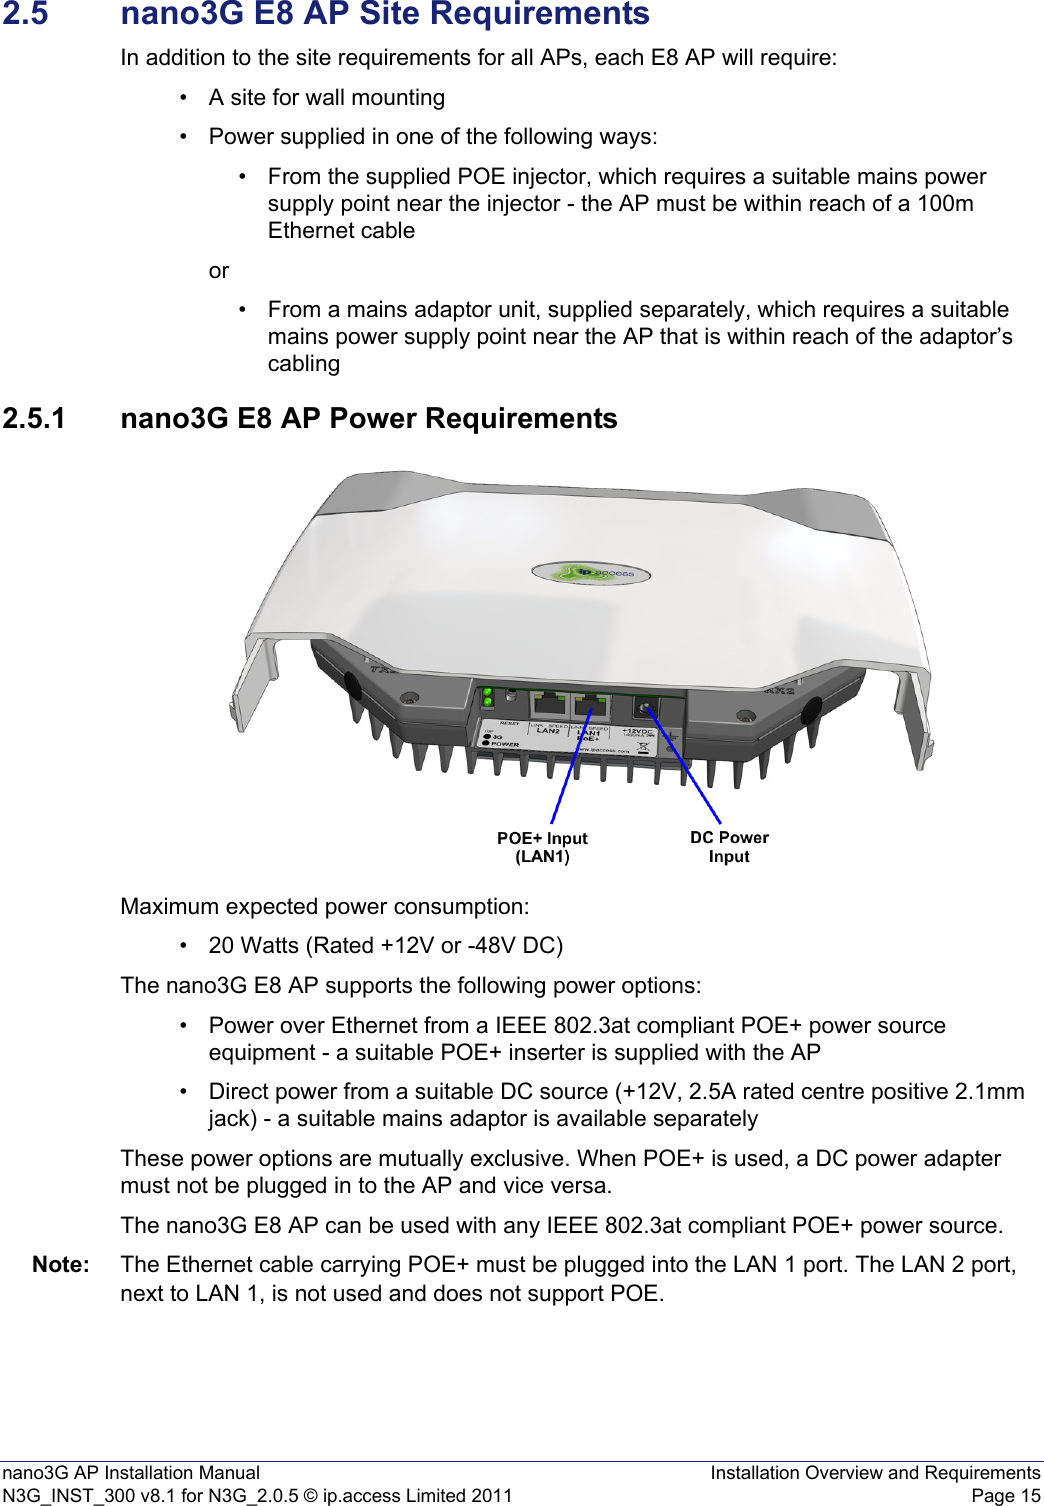 nano3G AP Installation Manual Installation Overview and RequirementsN3G_INST_300 v8.1 for N3G_2.0.5 © ip.access Limited 2011 Page 152.5 nano3G E8 AP Site RequirementsIn addition to the site requirements for all APs, each E8 AP will require:• A site for wall mounting• Power supplied in one of the following ways:• From the supplied POE injector, which requires a suitable mains power supply point near the injector - the AP must be within reach of a 100m Ethernet cable or• From a mains adaptor unit, supplied separately, which requires a suitable mains power supply point near the AP that is within reach of the adaptor’s cabling2.5.1 nano3G E8 AP Power RequirementsMaximum expected power consumption:• 20 Watts (Rated +12V or -48V DC)The nano3G E8 AP supports the following power options:• Power over Ethernet from a IEEE 802.3at compliant POE+ power source equipment - a suitable POE+ inserter is supplied with the AP• Direct power from a suitable DC source (+12V, 2.5A rated centre positive 2.1mm jack) - a suitable mains adaptor is available separatelyThese power options are mutually exclusive. When POE+ is used, a DC power adapter must not be plugged in to the AP and vice versa.The nano3G E8 AP can be used with any IEEE 802.3at compliant POE+ power source.Note: The Ethernet cable carrying POE+ must be plugged into the LAN 1 port. The LAN 2 port, next to LAN 1, is not used and does not support POE.